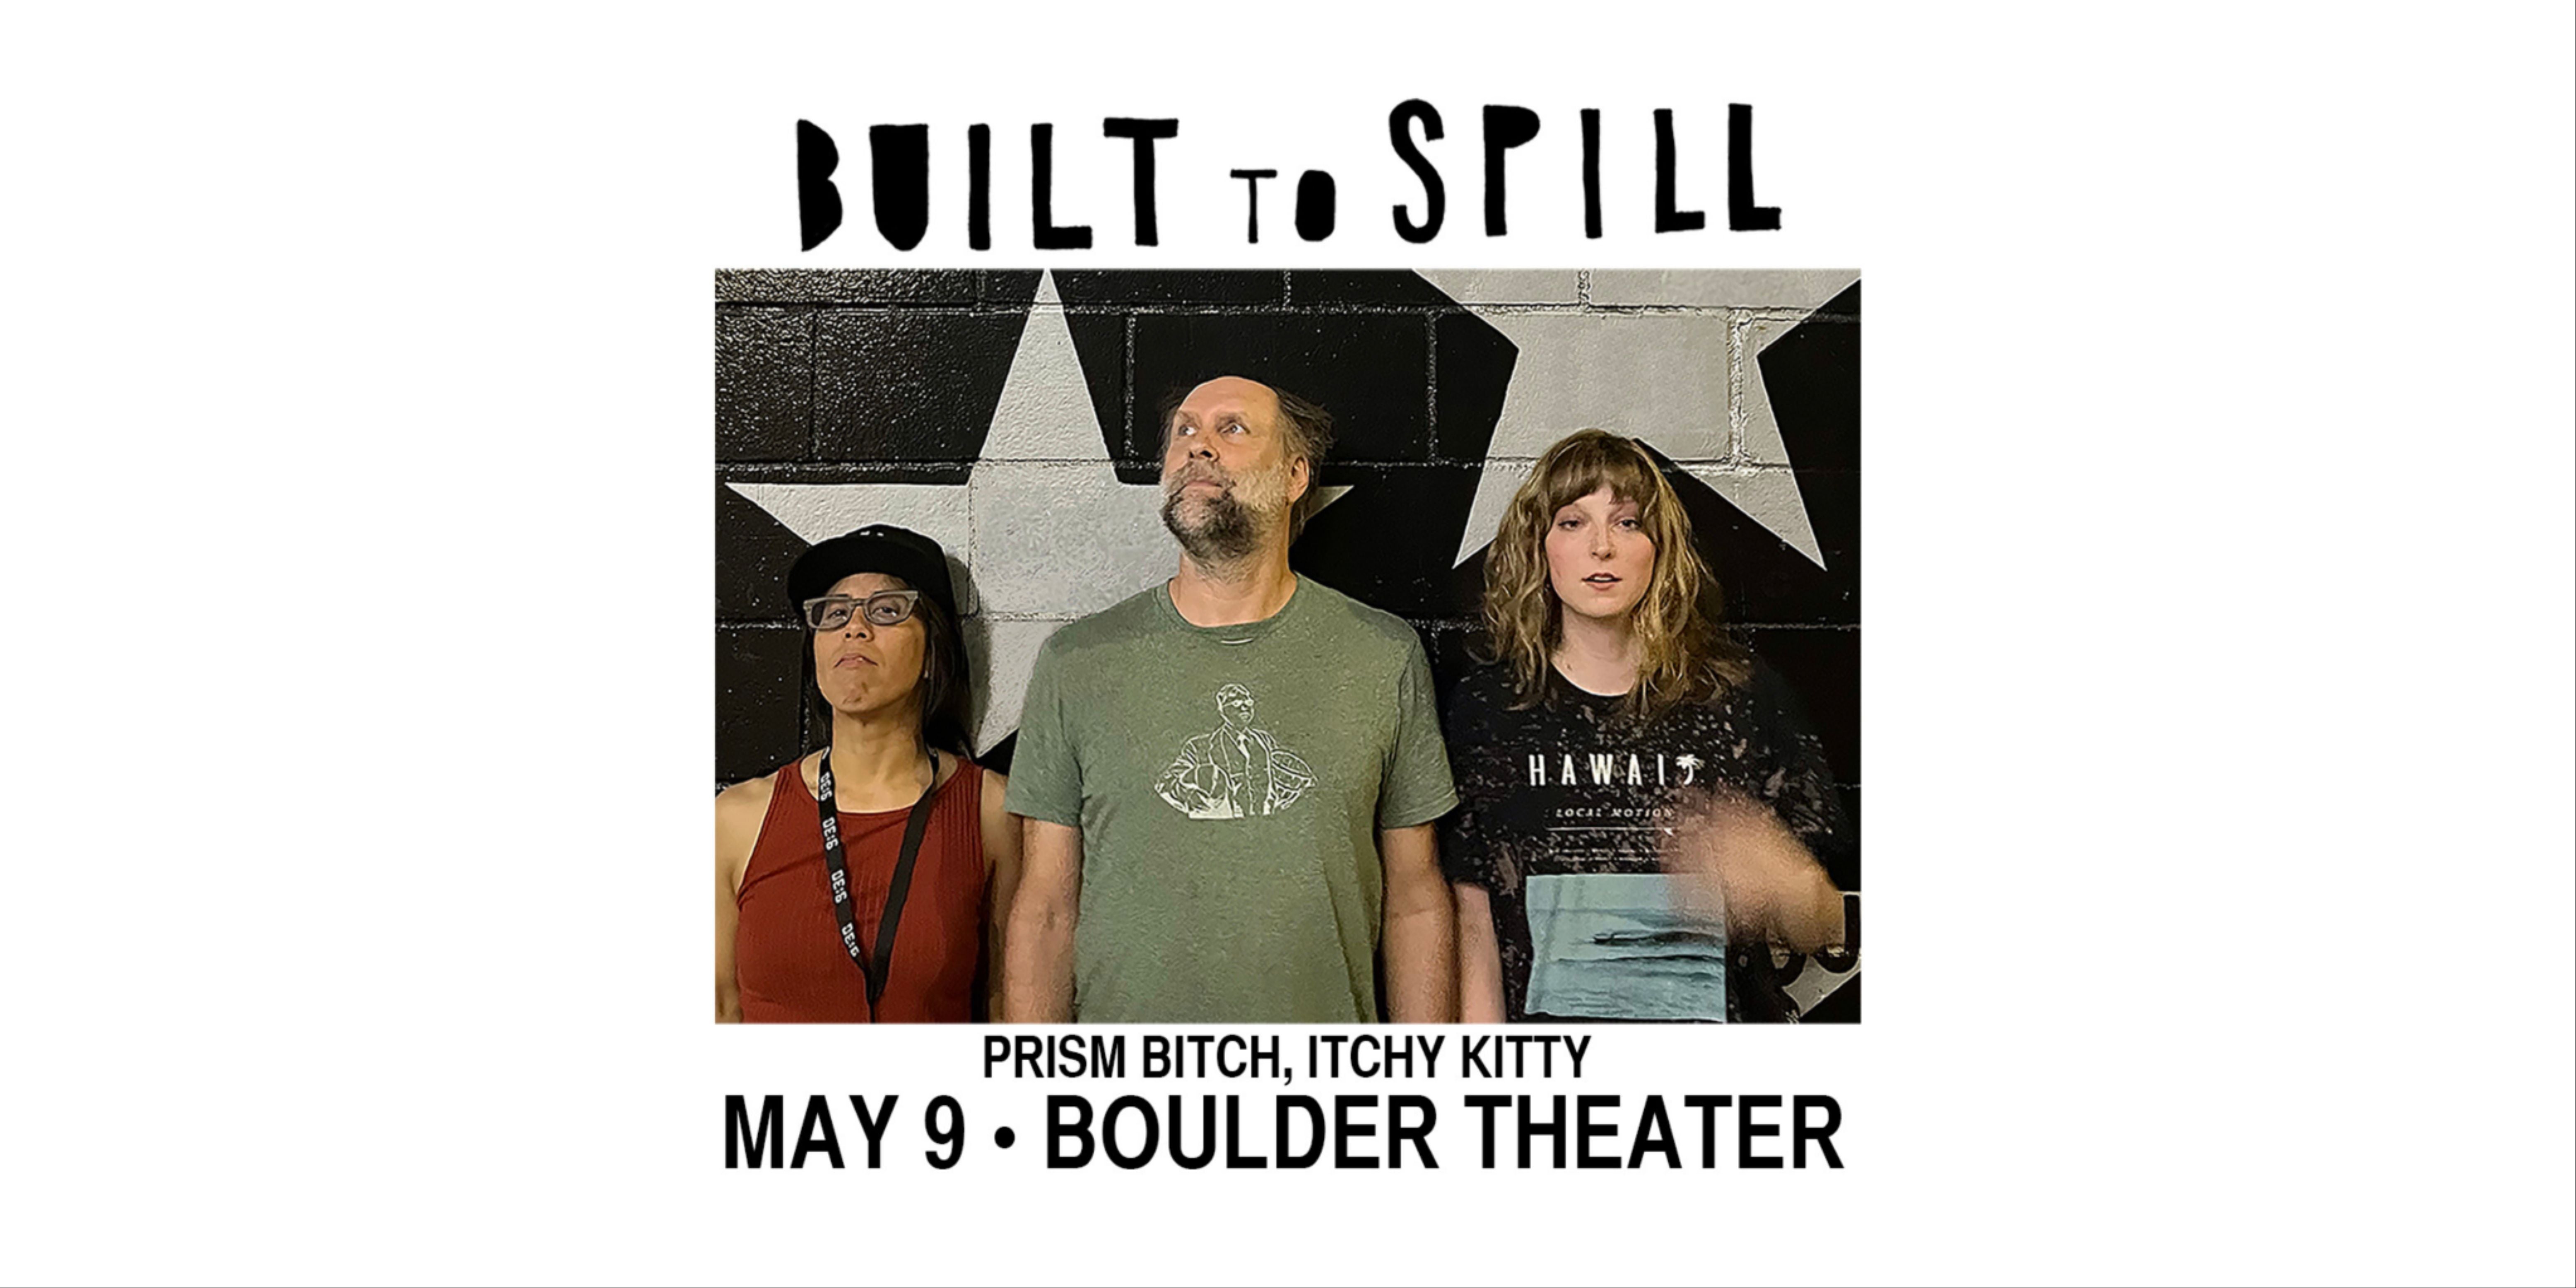 Built To Spill With Prism Bitch Itchy Kitty Z2 Entertainment